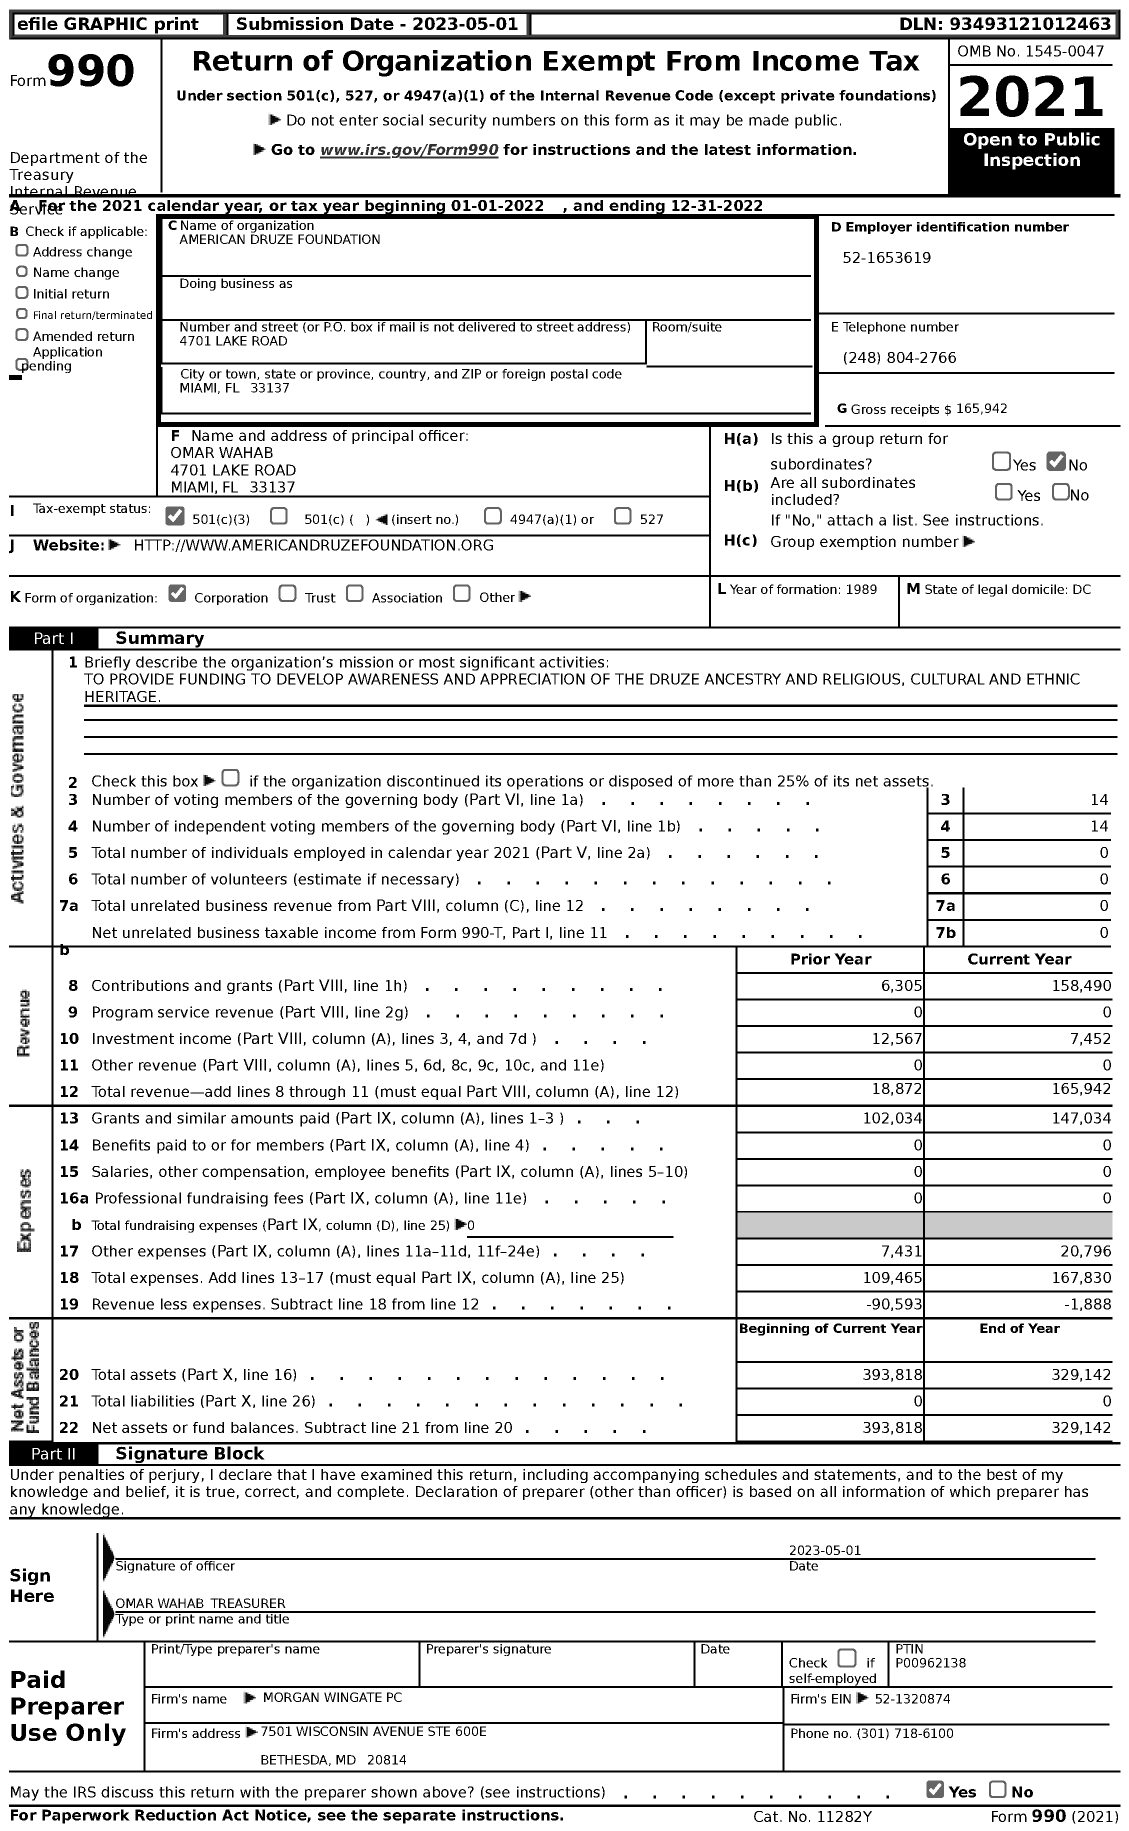 Image of first page of 2022 Form 990 for American Druze Foundation